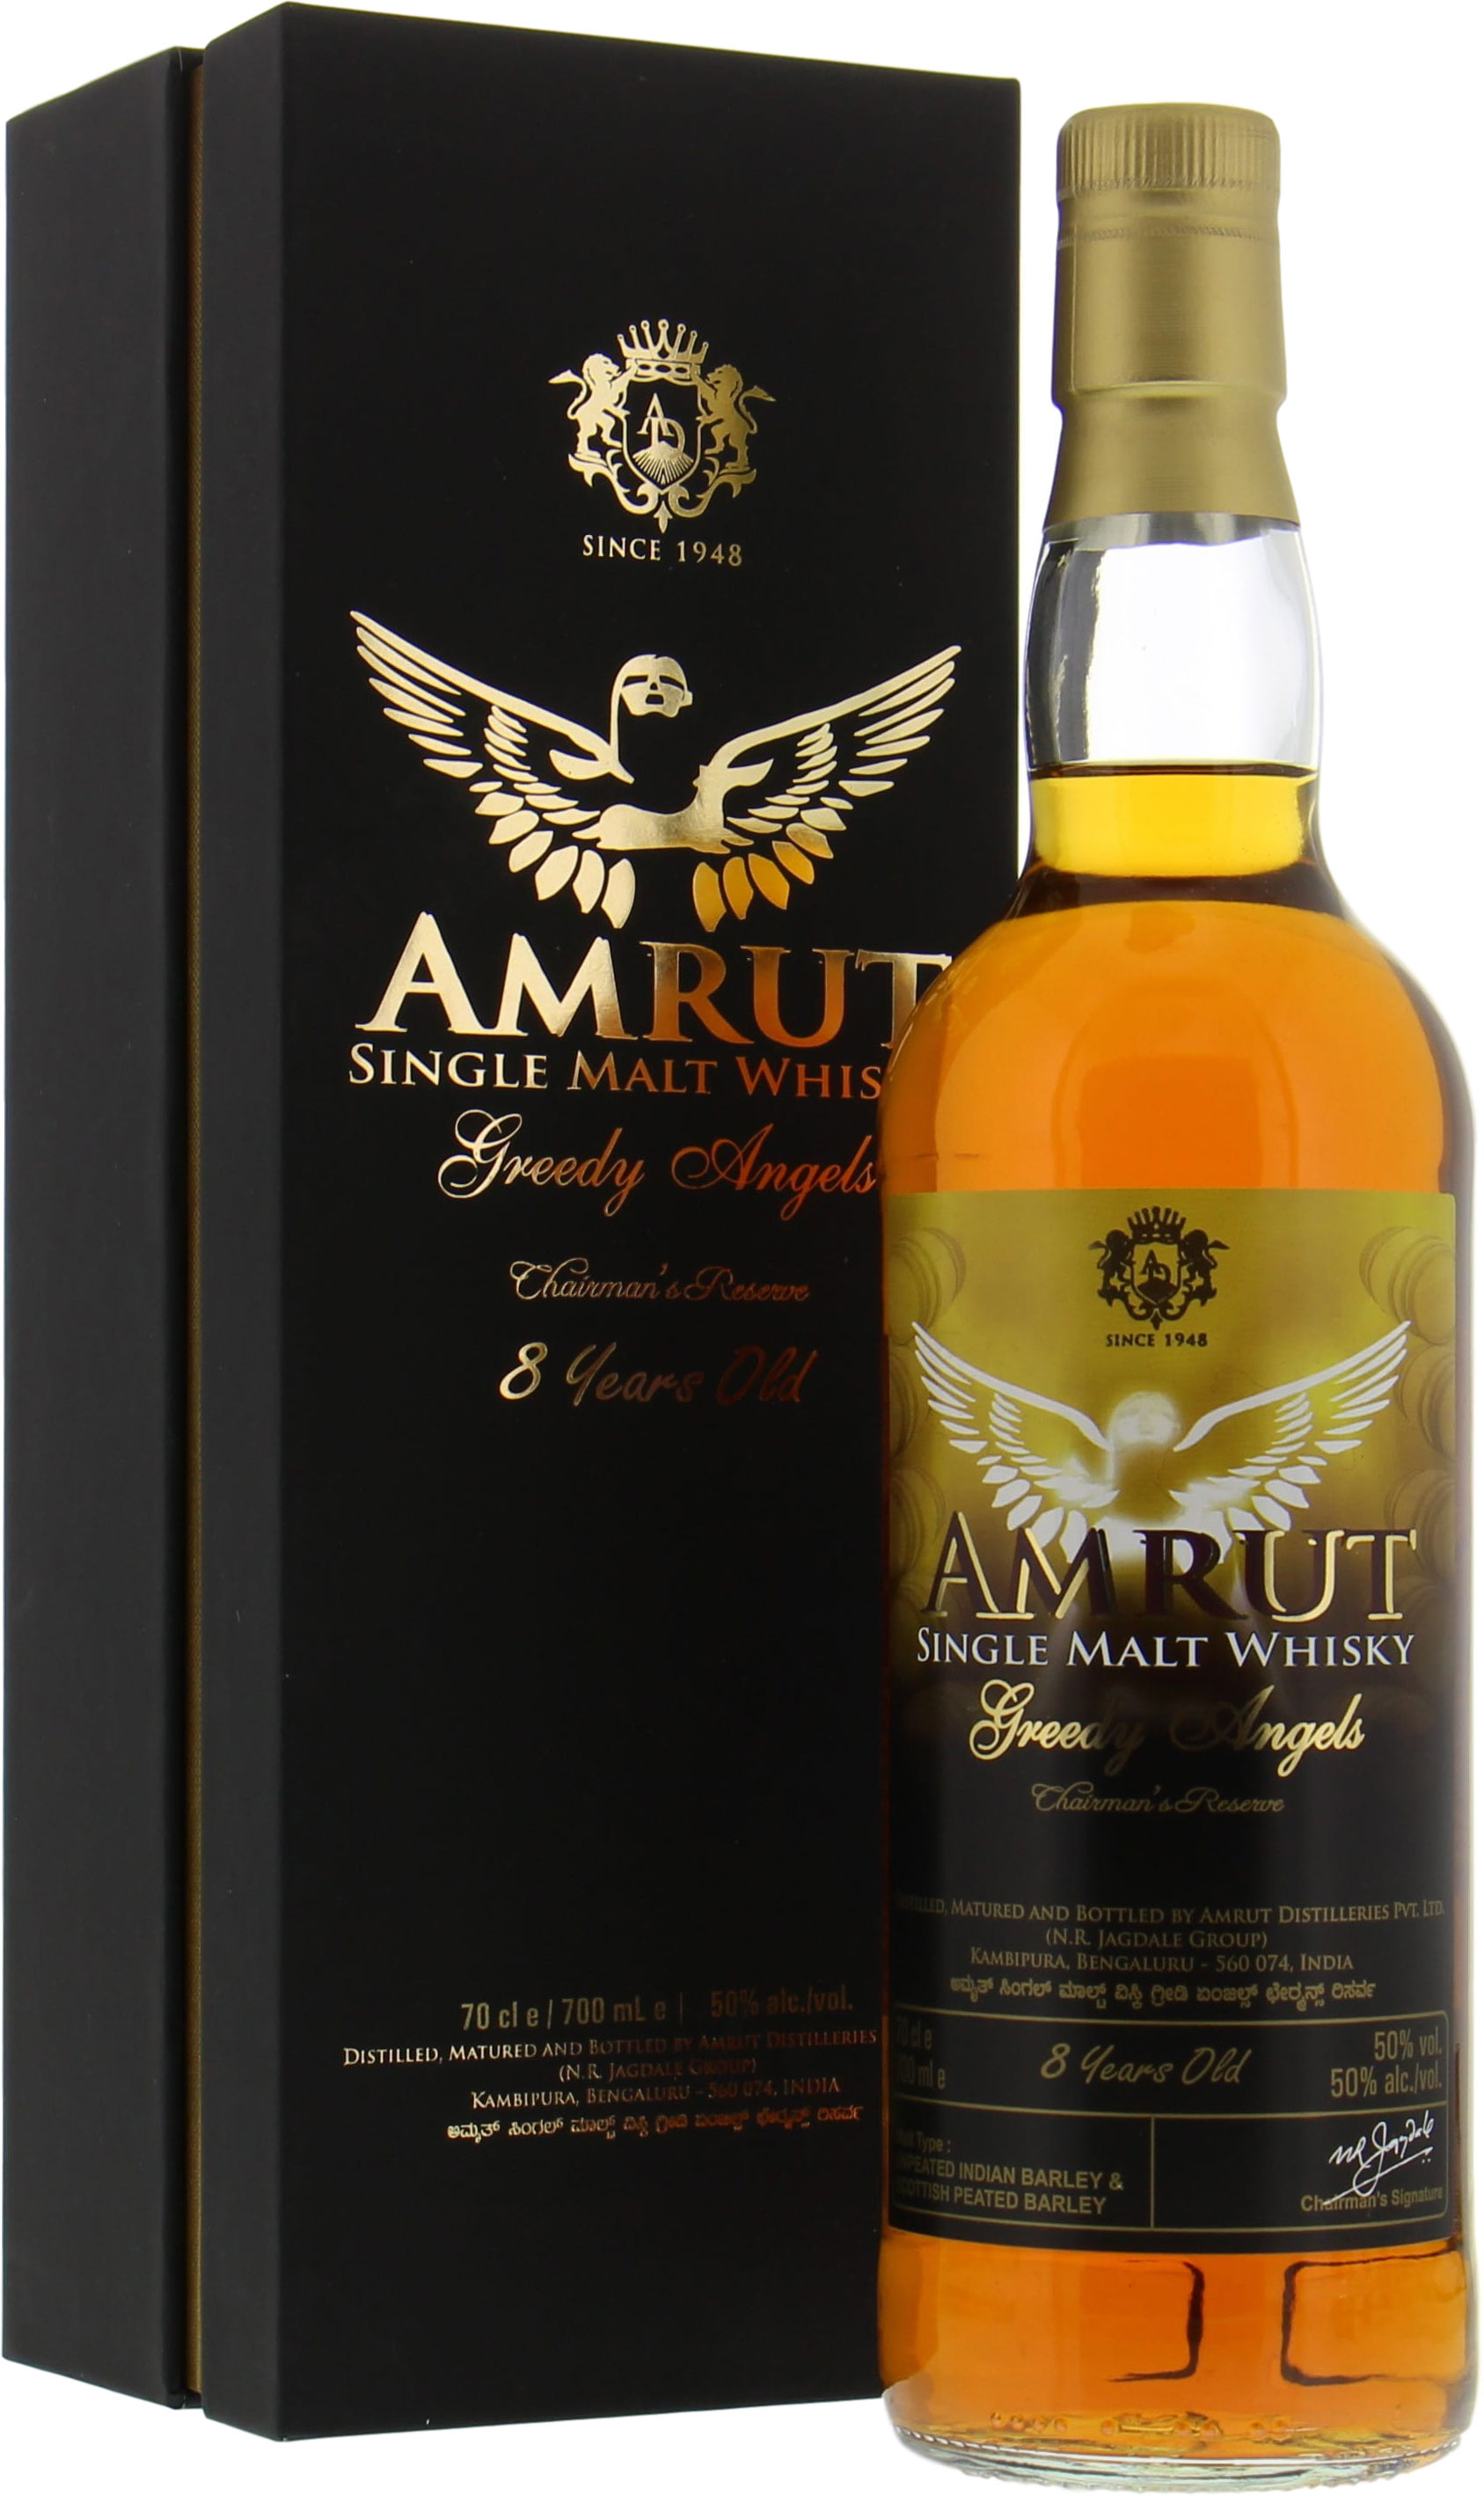 Amrut - 8 Years Old Greedy Angels Chairman's Reserve 50% NV In Original Container